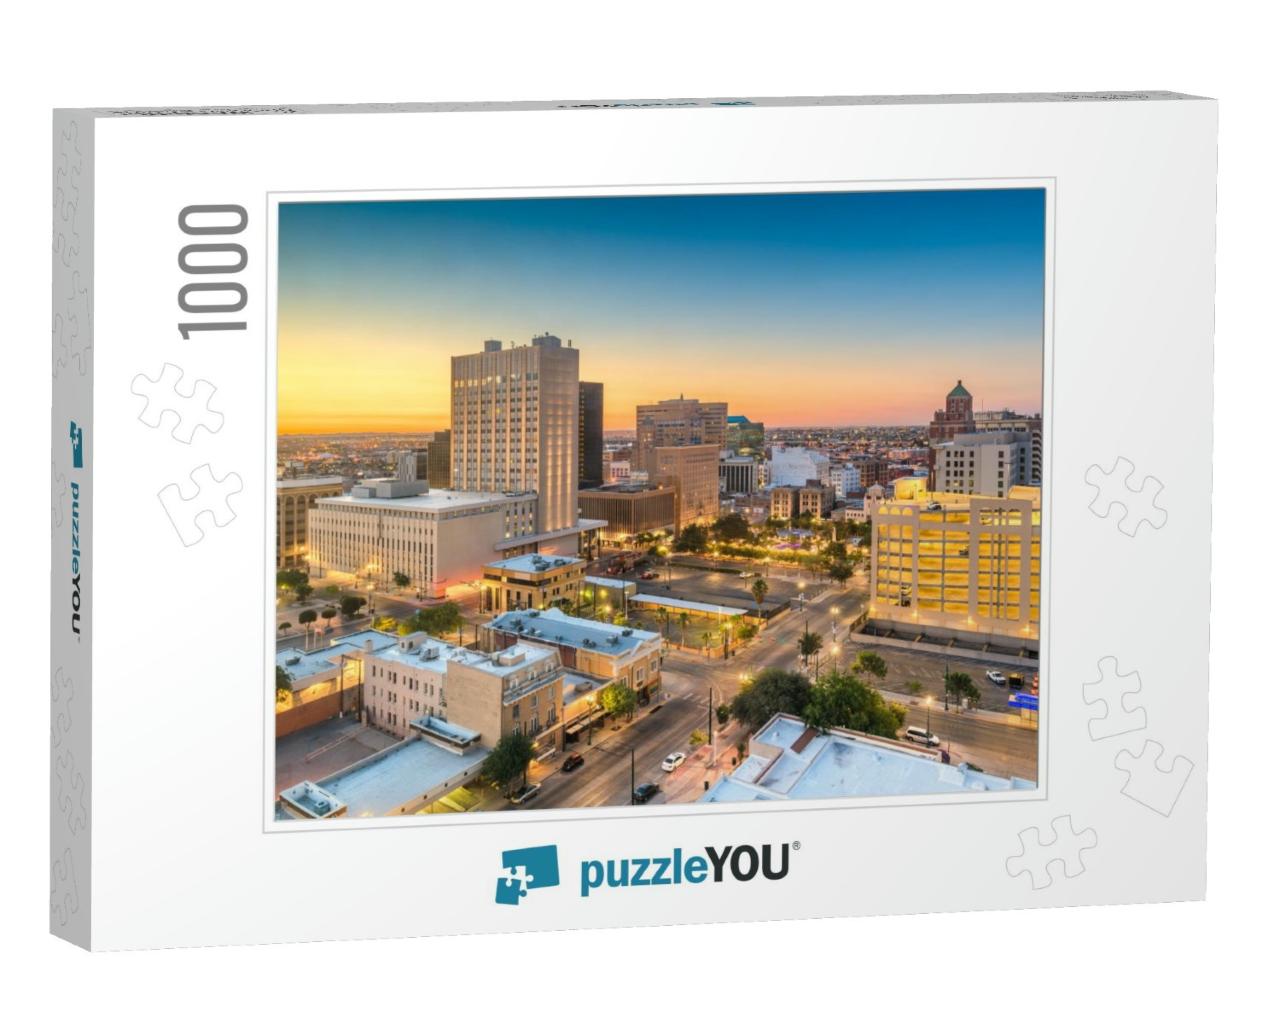 El Paso, Texas, USA Downtown City Skyline At Twilight... Jigsaw Puzzle with 1000 pieces